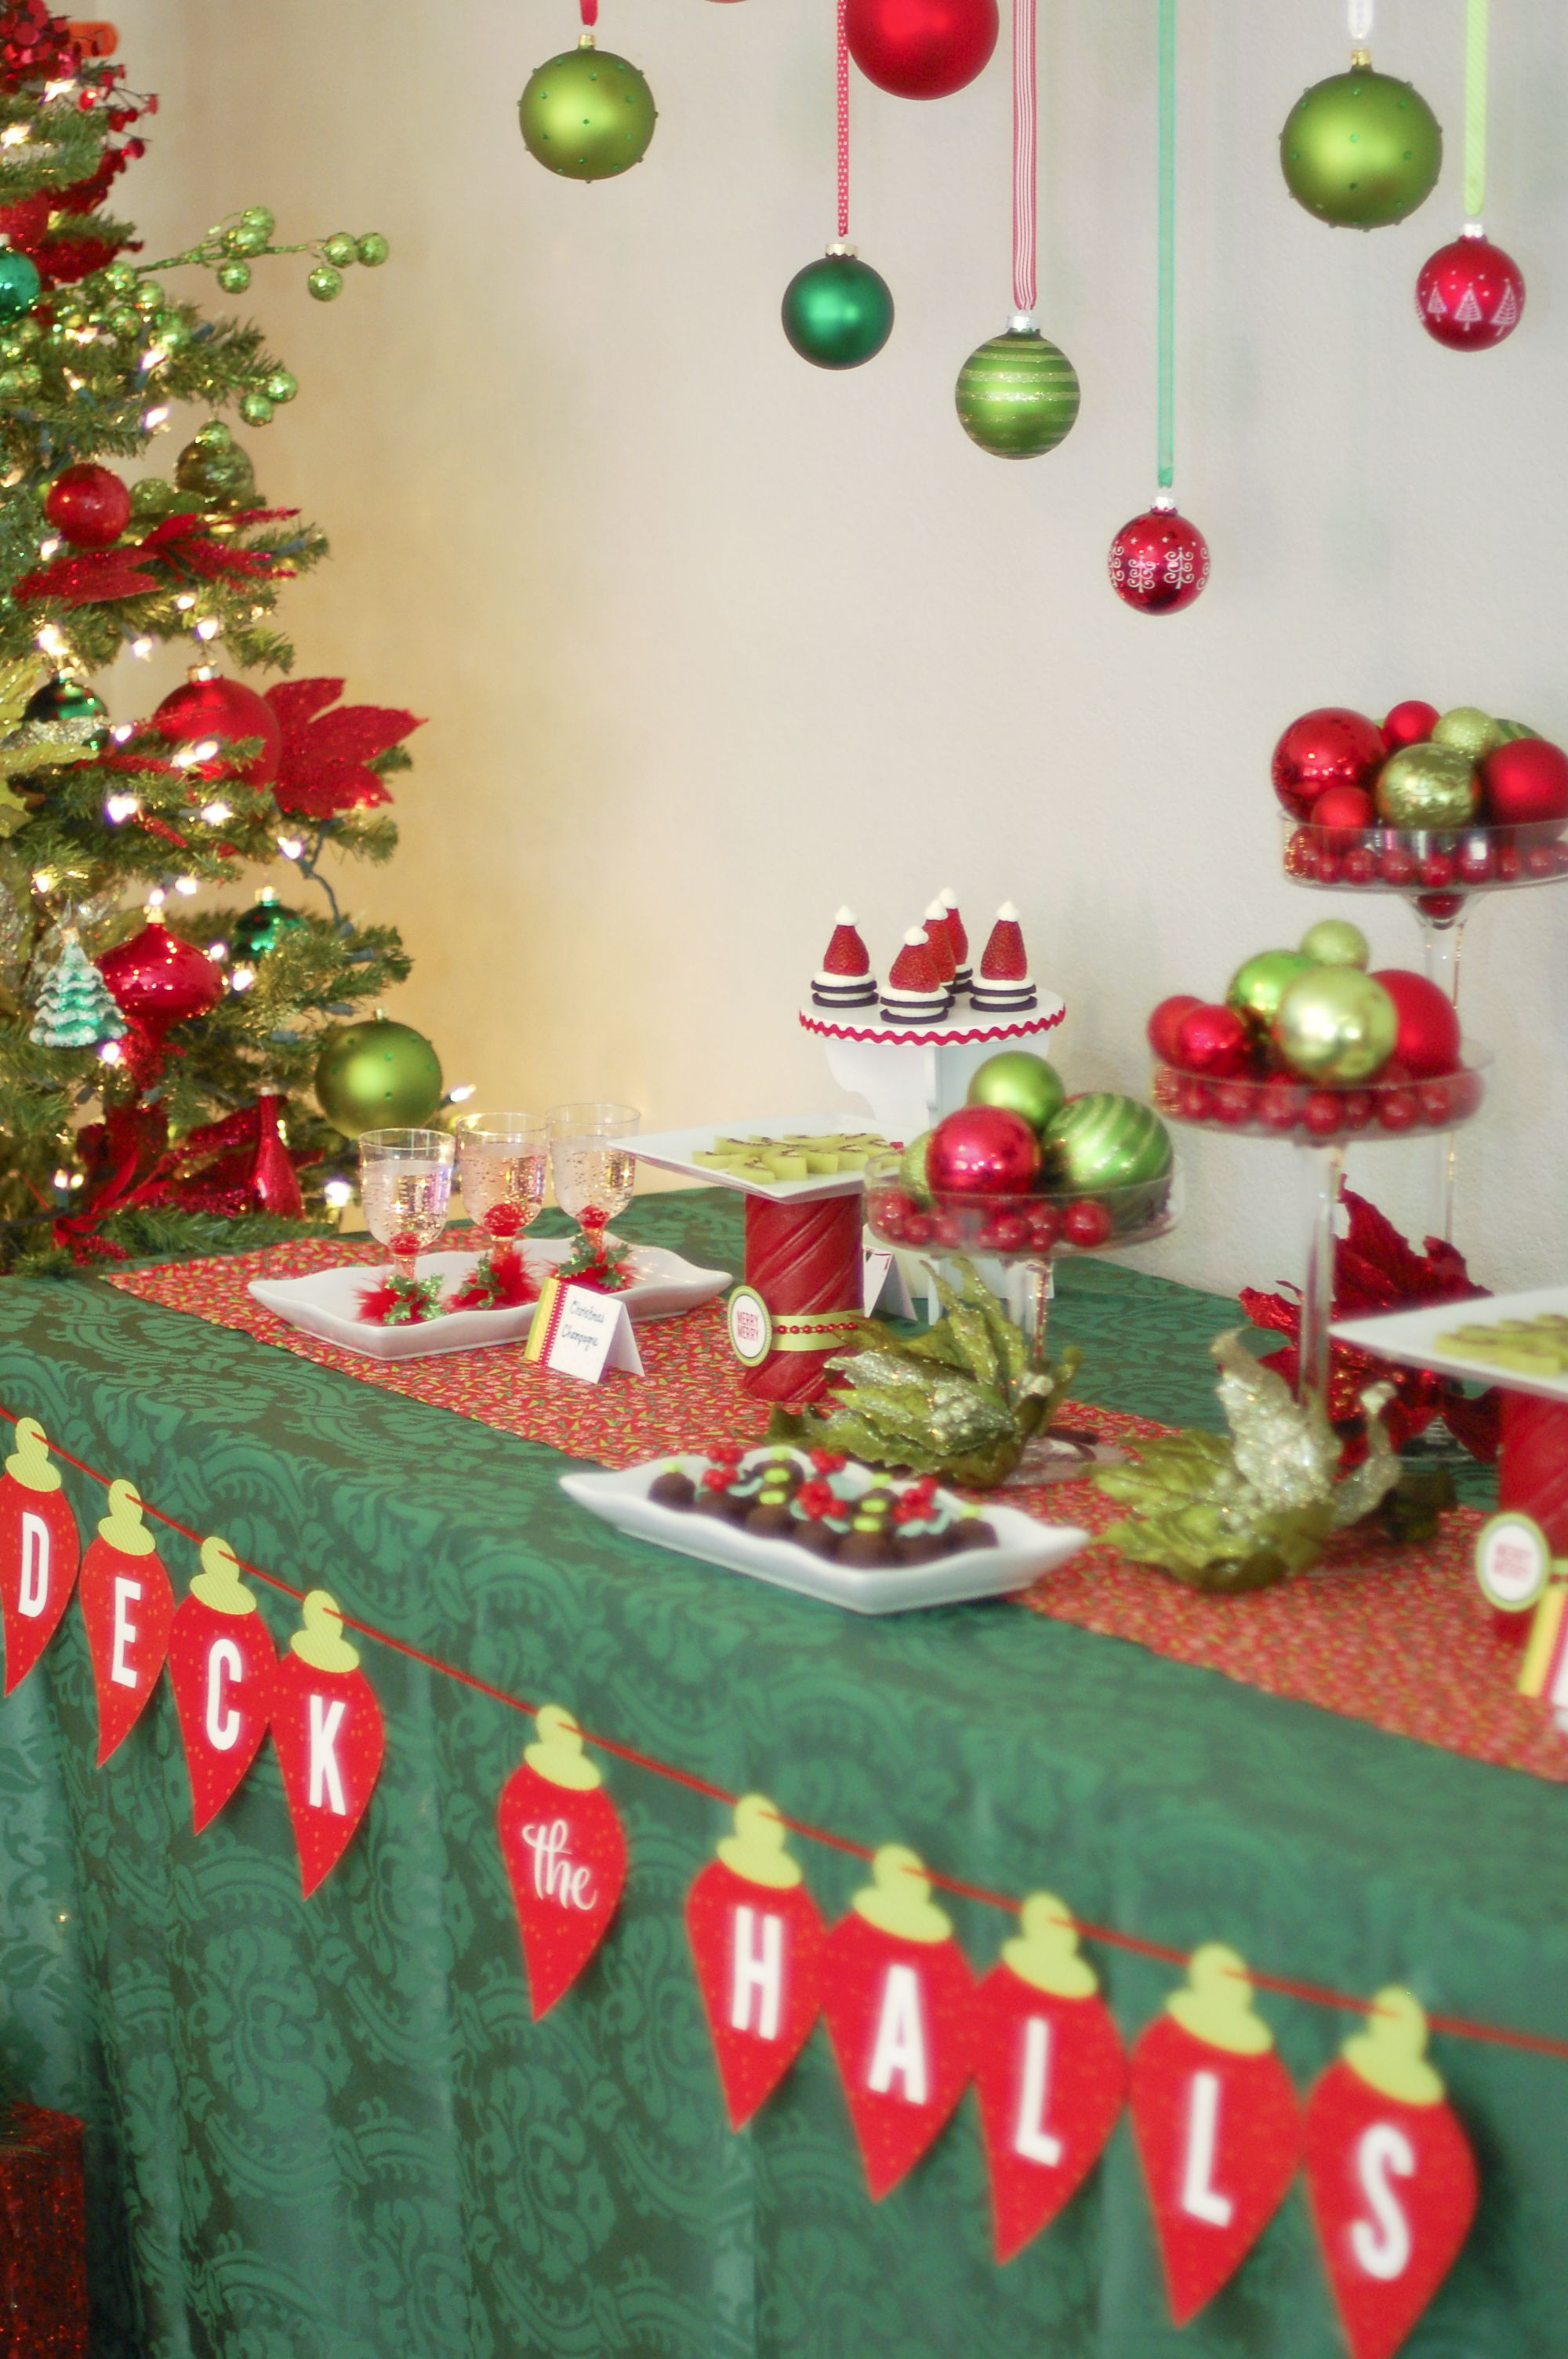 The Best Christmas In July Party Ideas for Adults  Home Inspiration